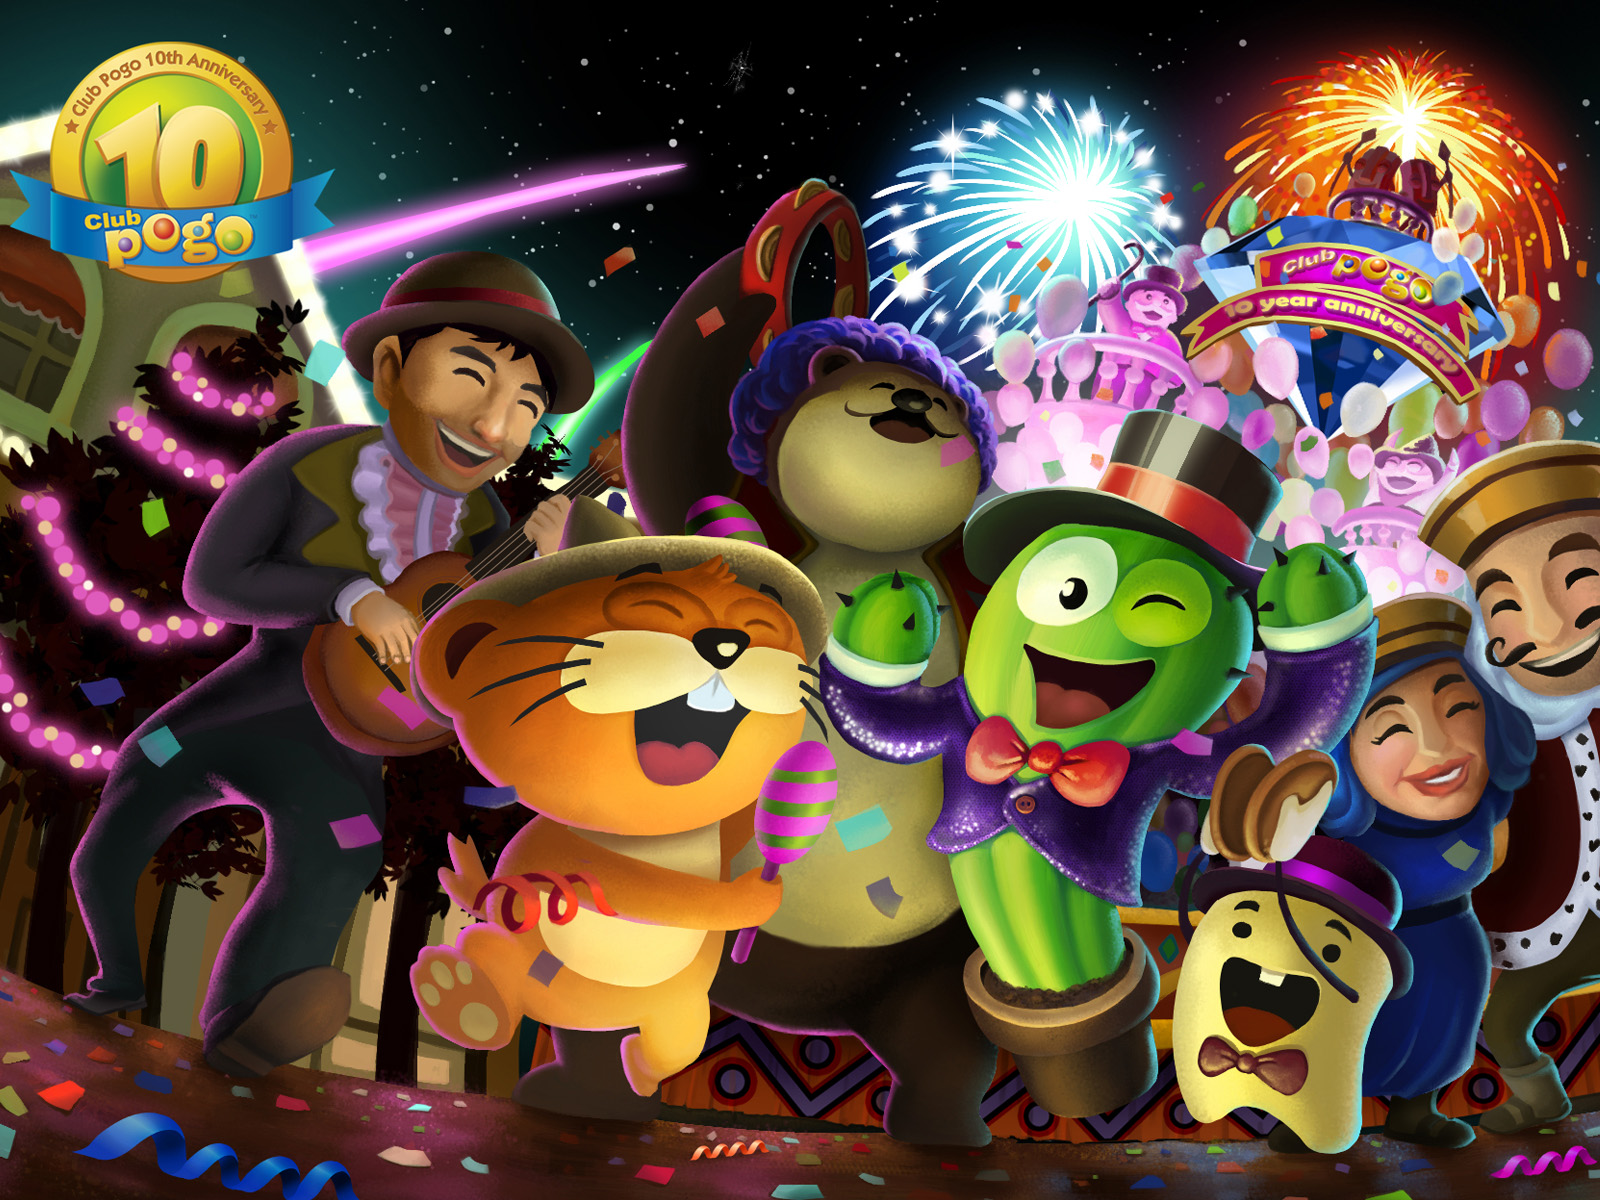 Deck Out Your Desktop With A Club Pogo Year Anniversary Wallpaper